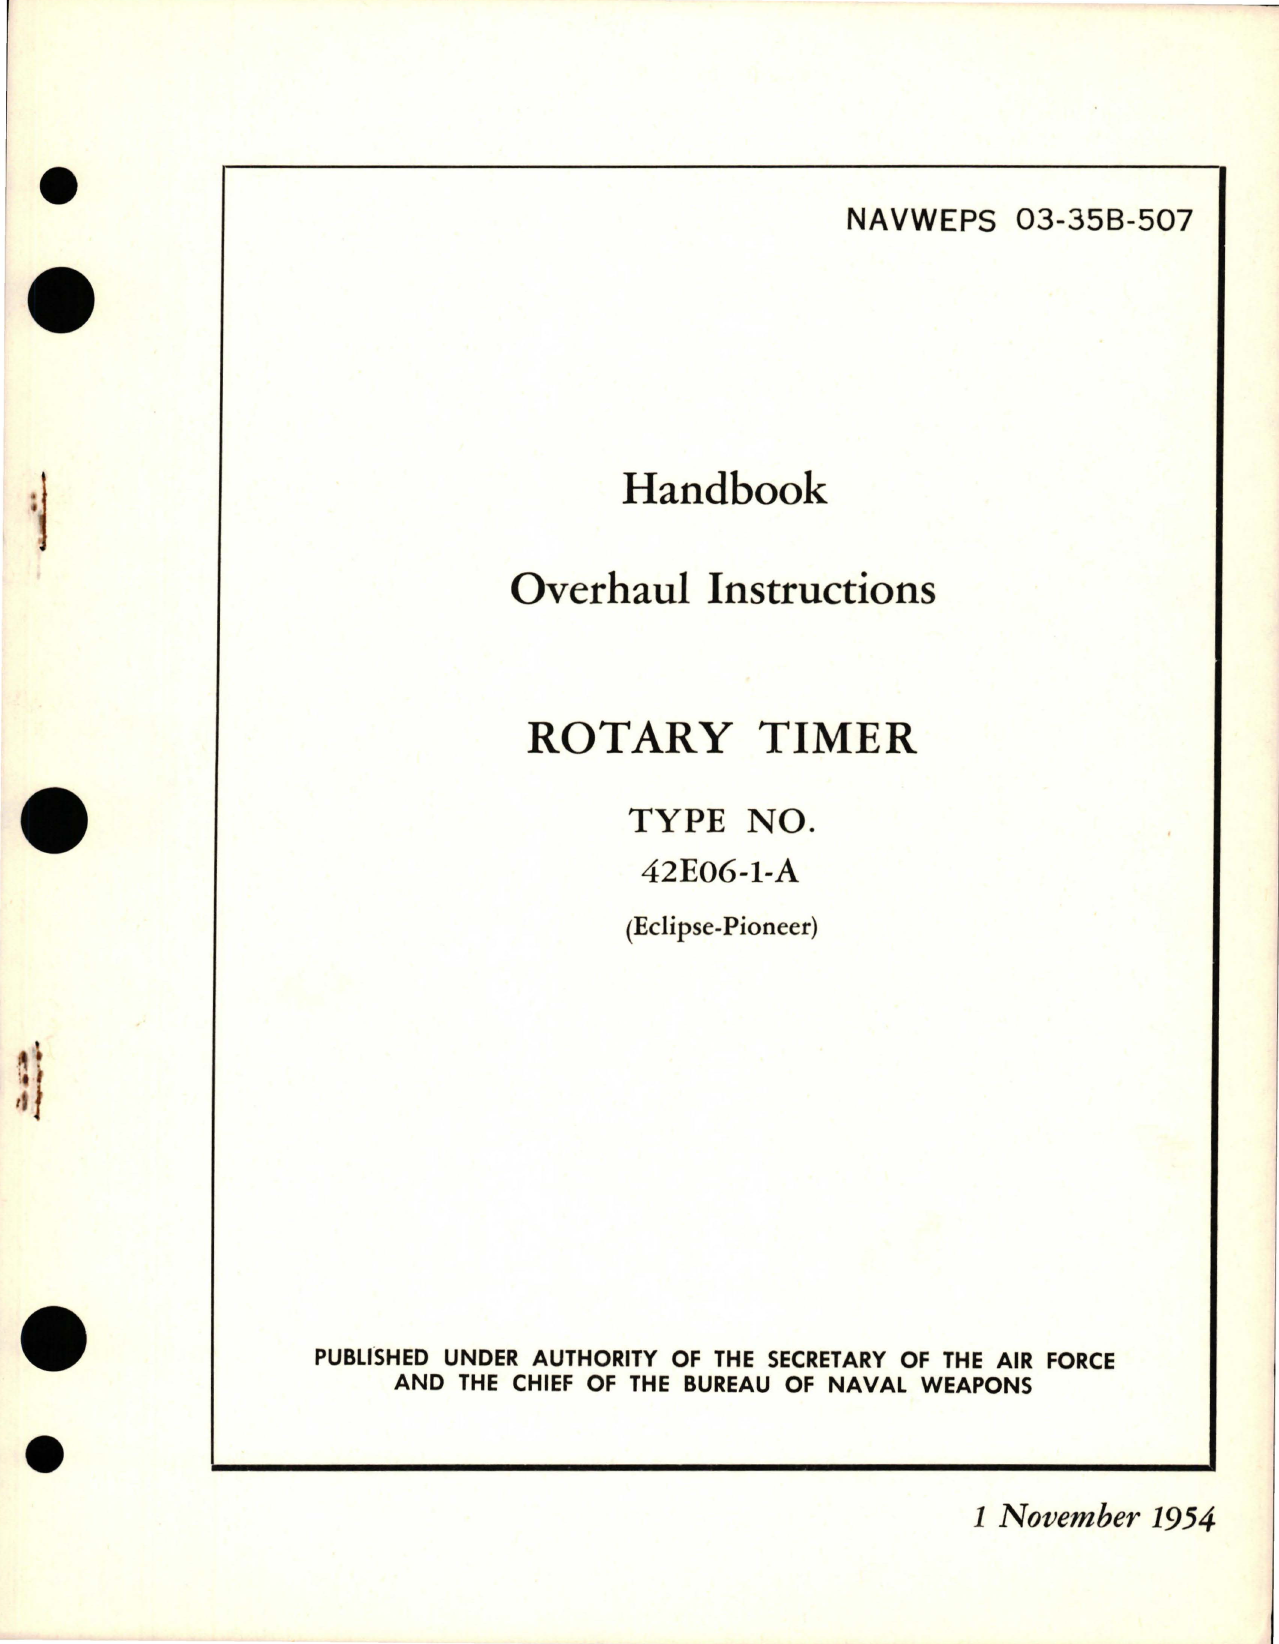 Sample page 1 from AirCorps Library document: Overhaul Instructions for Rotary Timer - Type 42E06-1-A